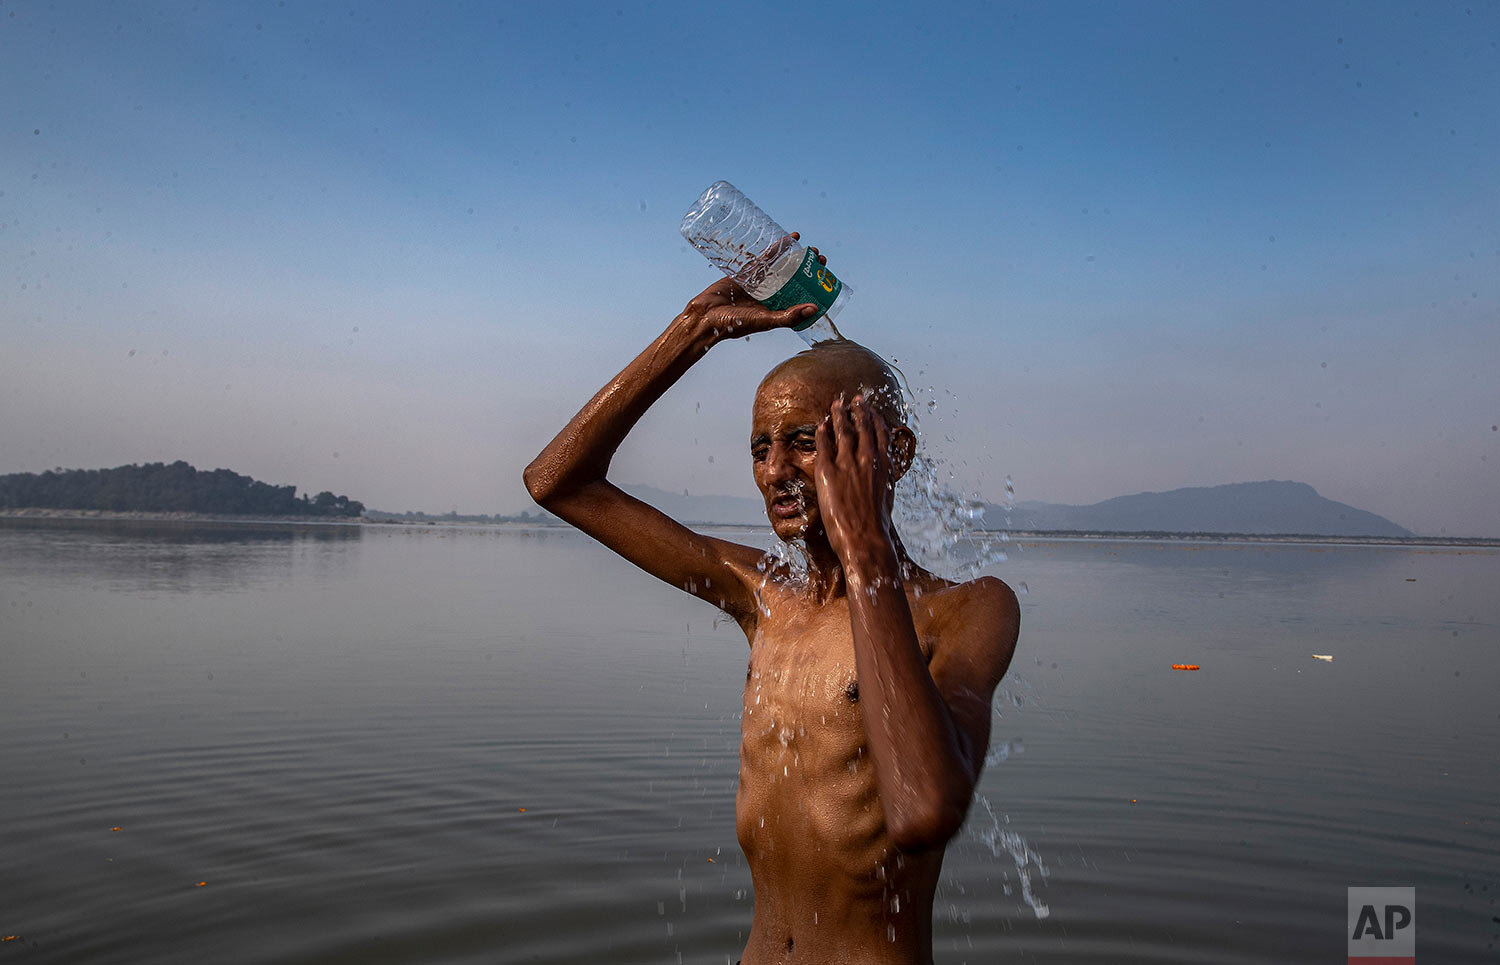  An Indian man baths after performing rituals on the banks of river Brahmaputra in Gauhati, India, Thursday, Dec. 24, 2020. (AP Photo/Anupam Nath) 